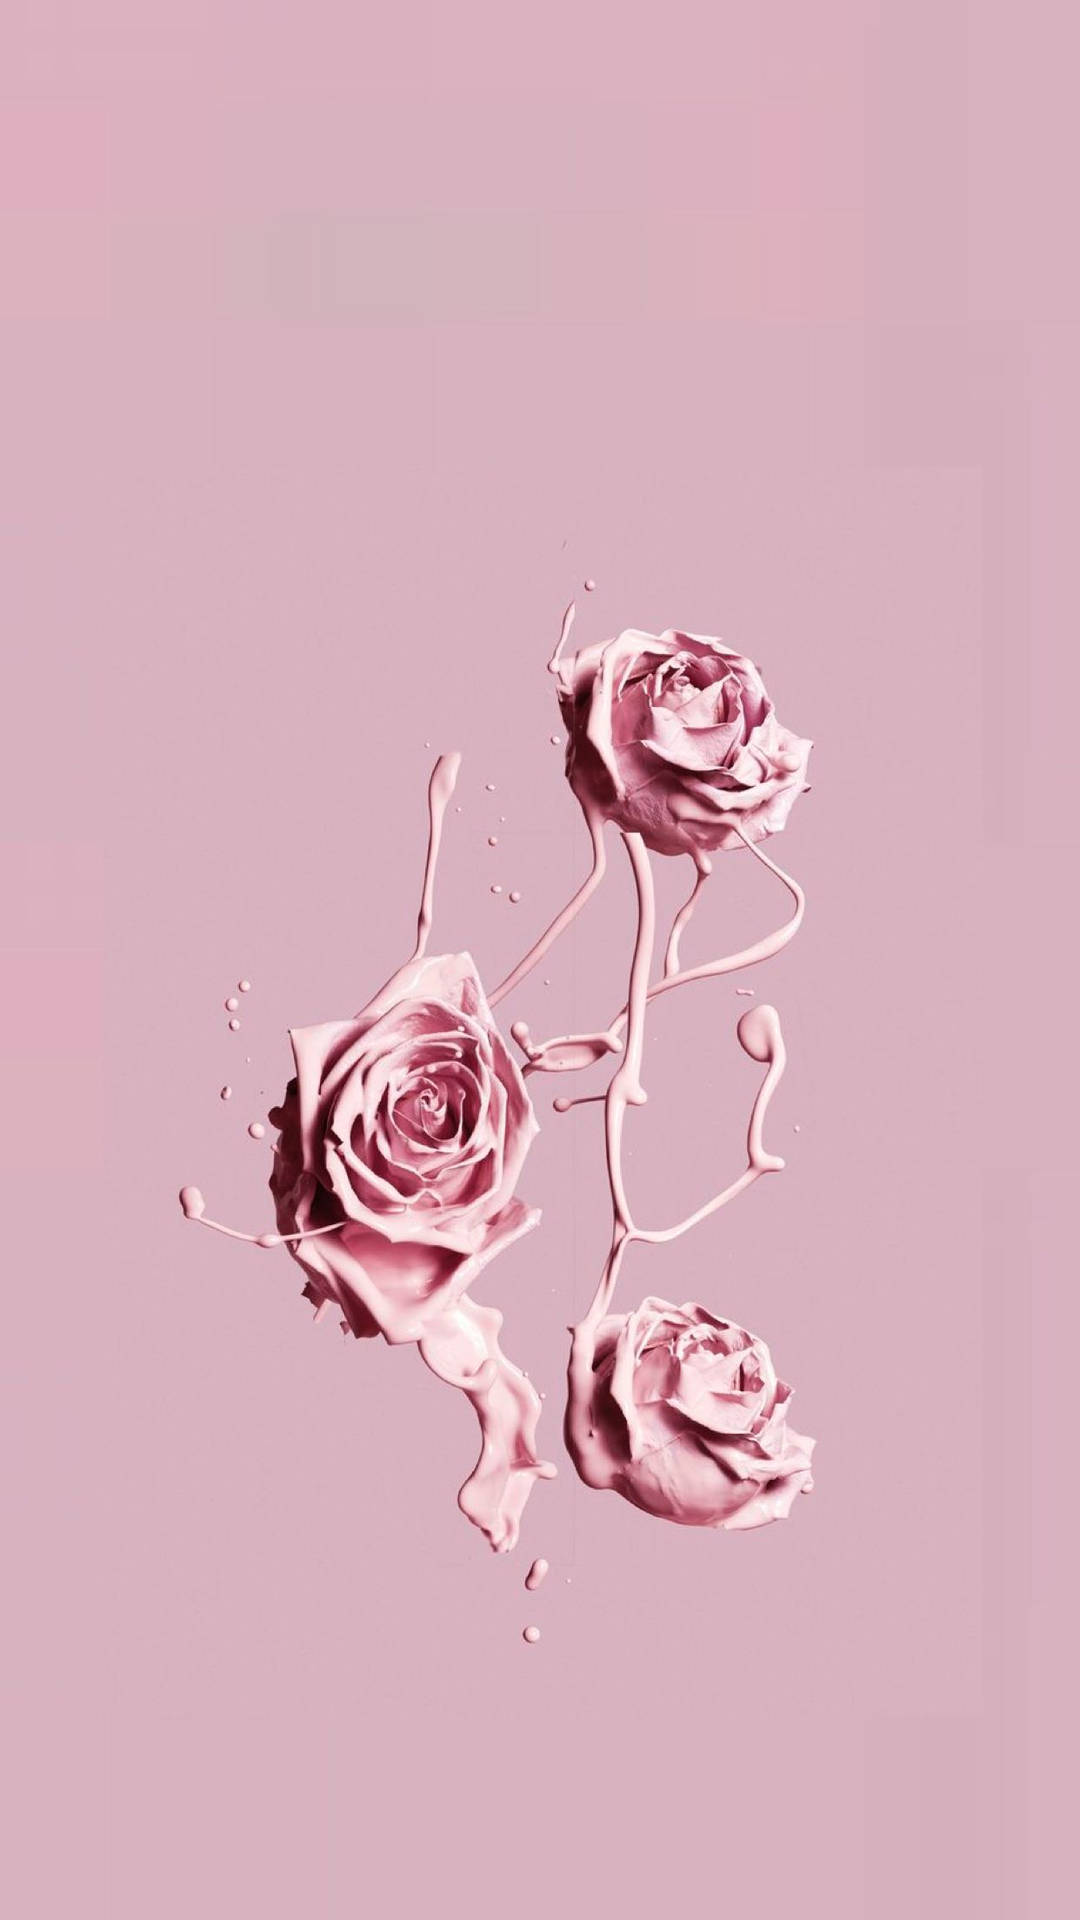 Dripping Rose Plain Pink Background